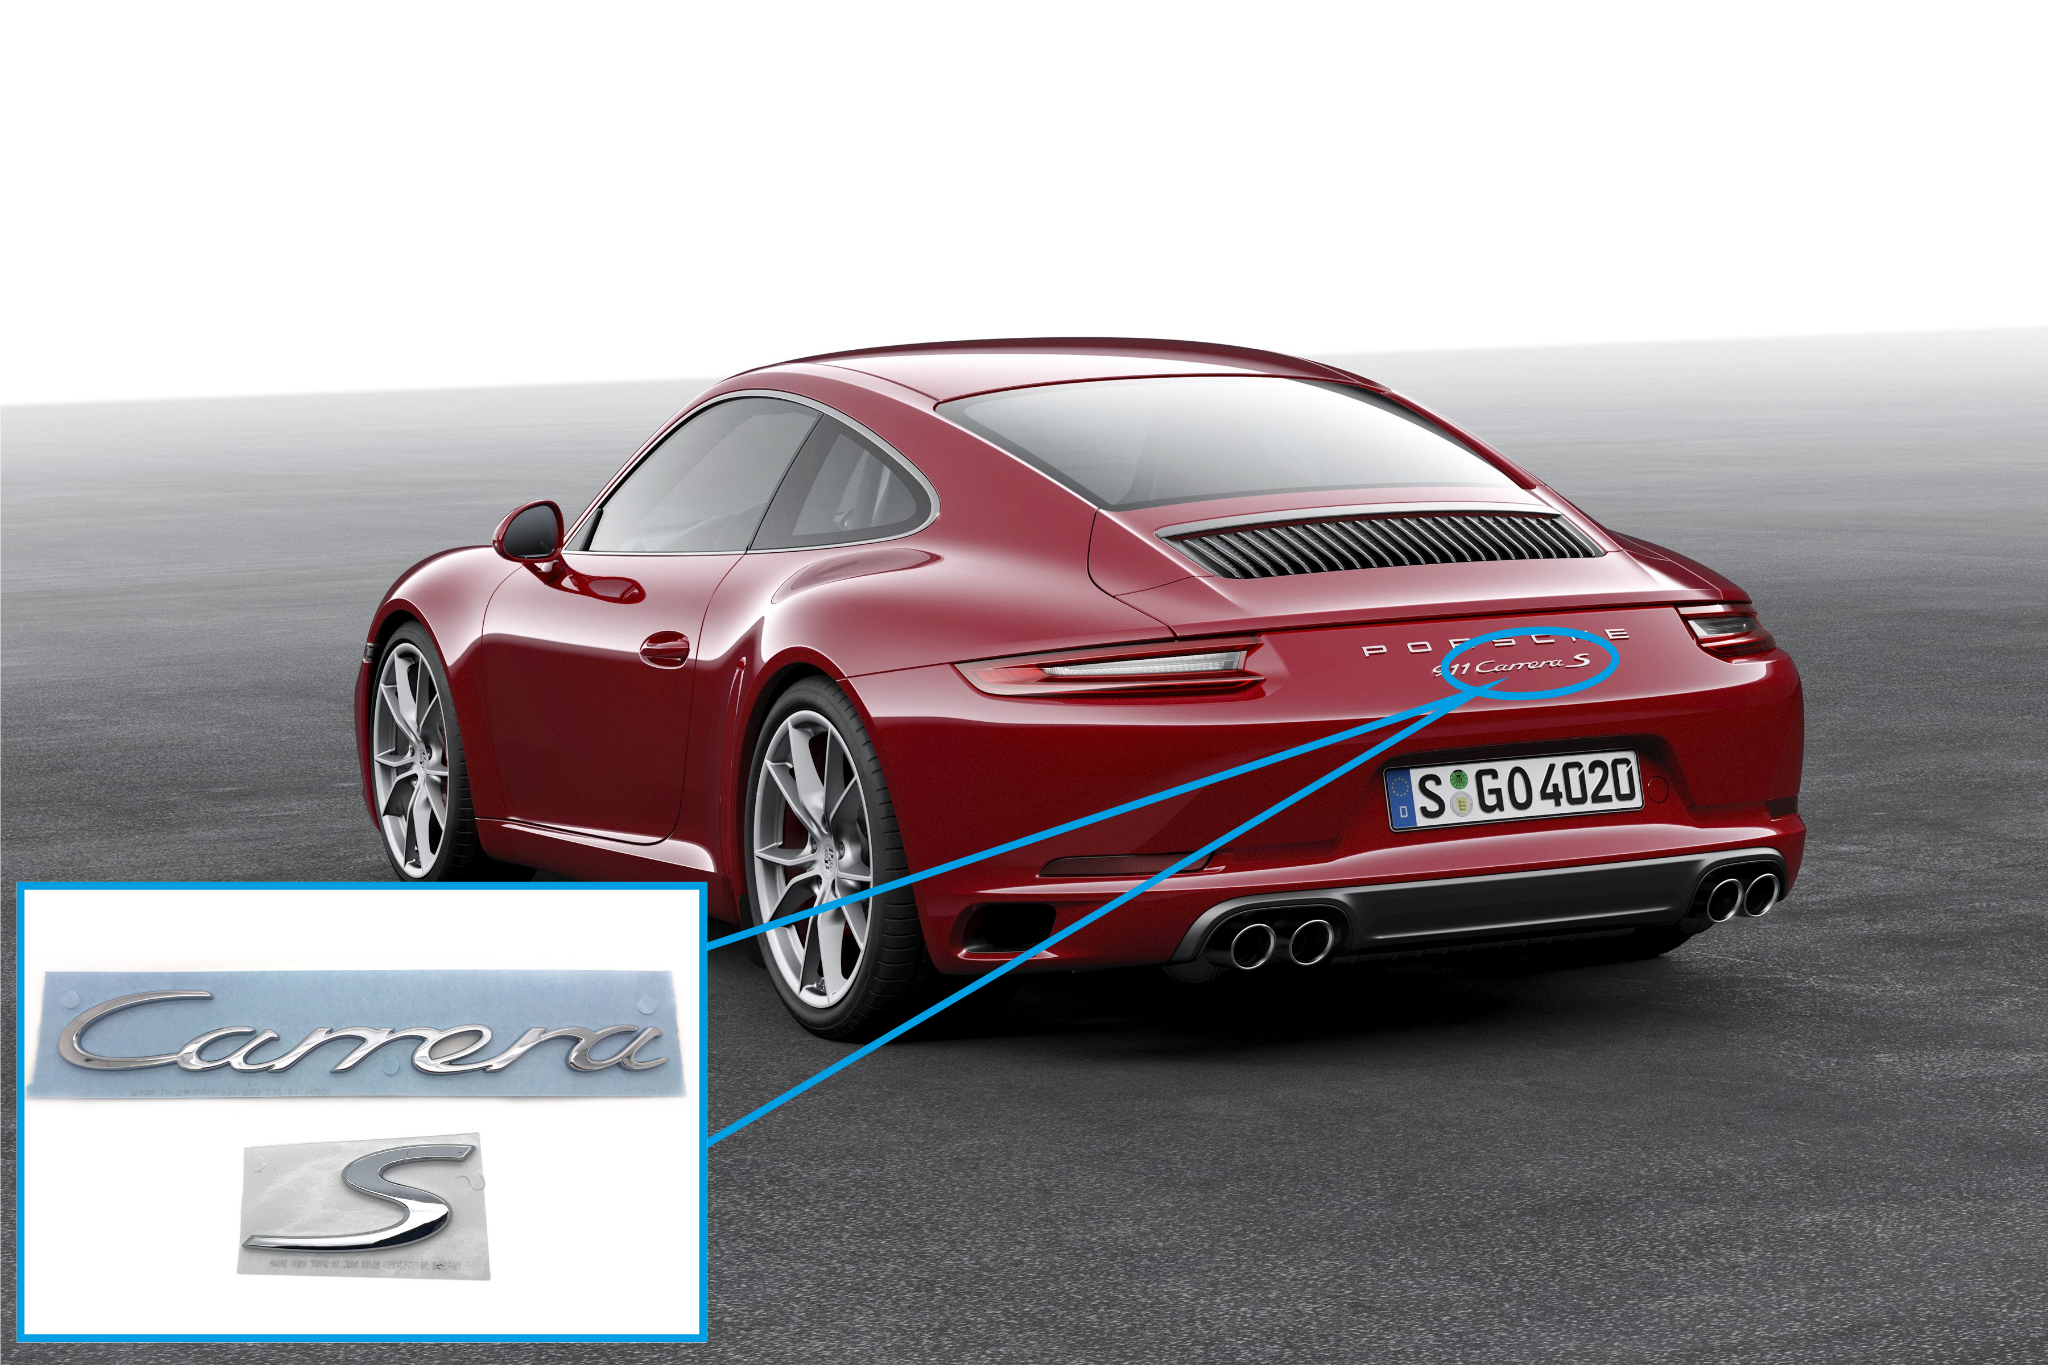 Porsche Official 'Carrera S' Rear Badge in Chrome Silver for 911 Type 991 Carrera S Models!